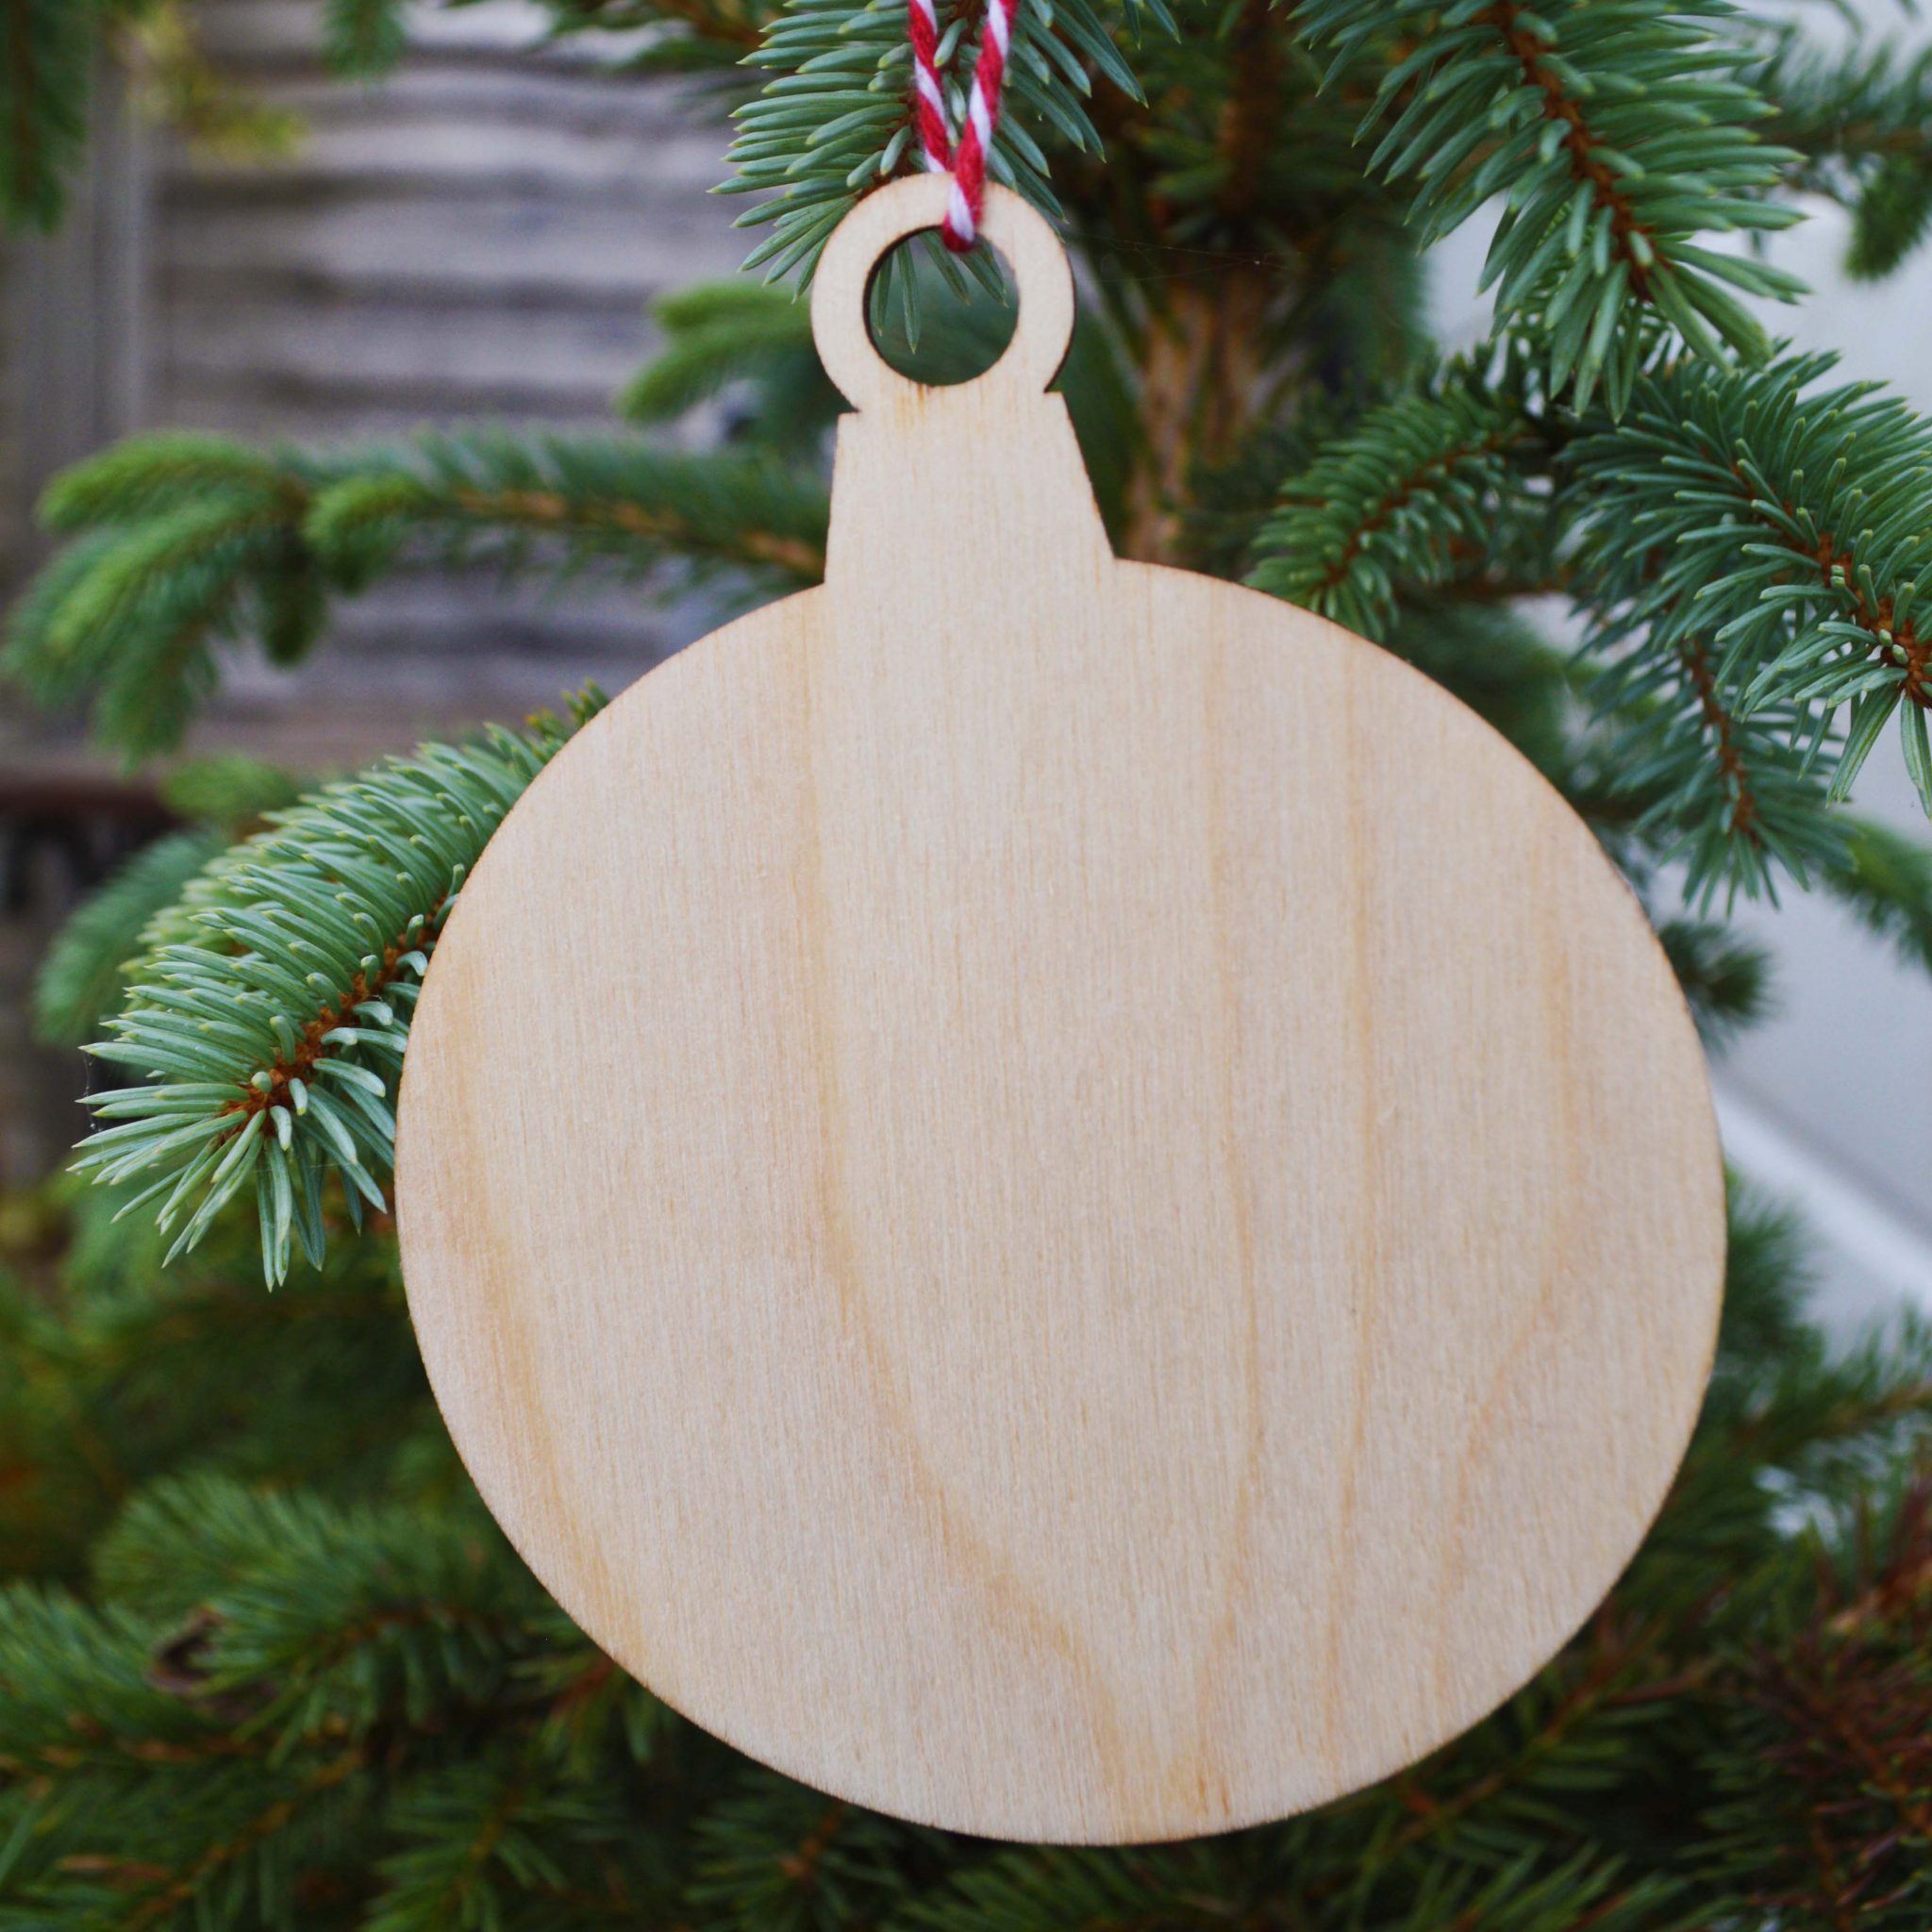 Wooden Bauble on Christmas Tree